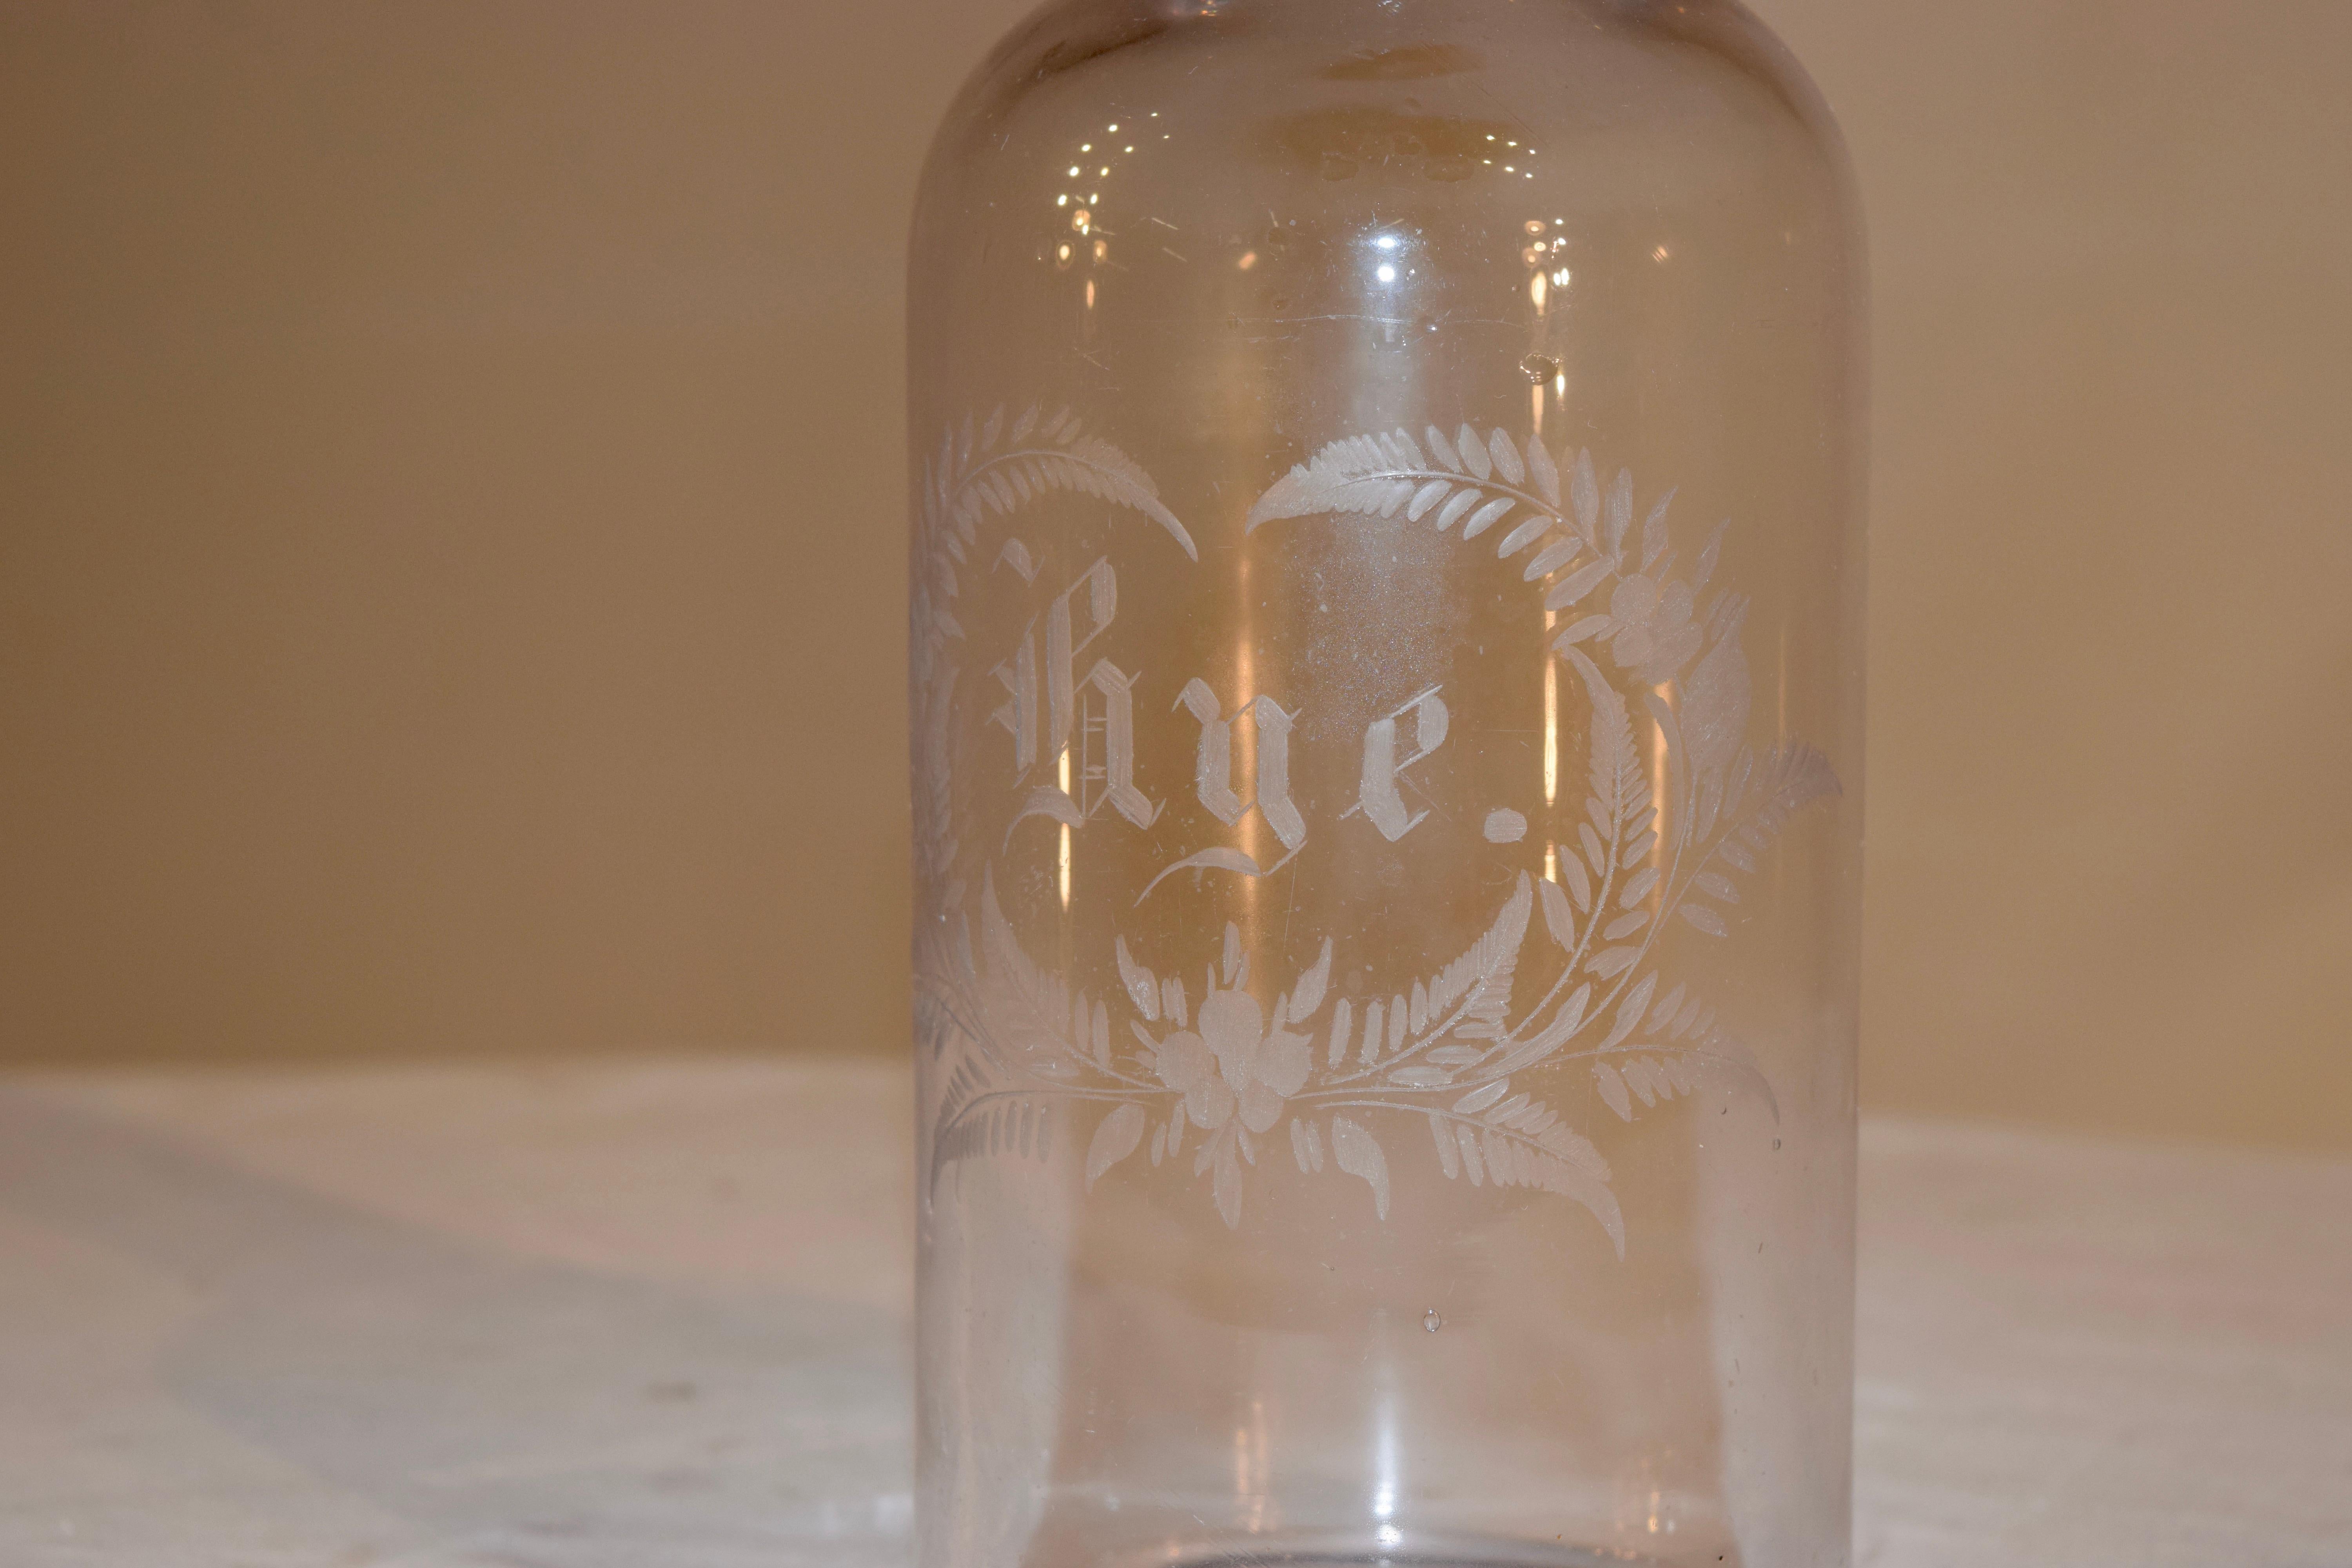 19th century English rye bottle from England which has a copper wheel etched design of a wreath of leaves surrounding the word rye. Lovely condition.